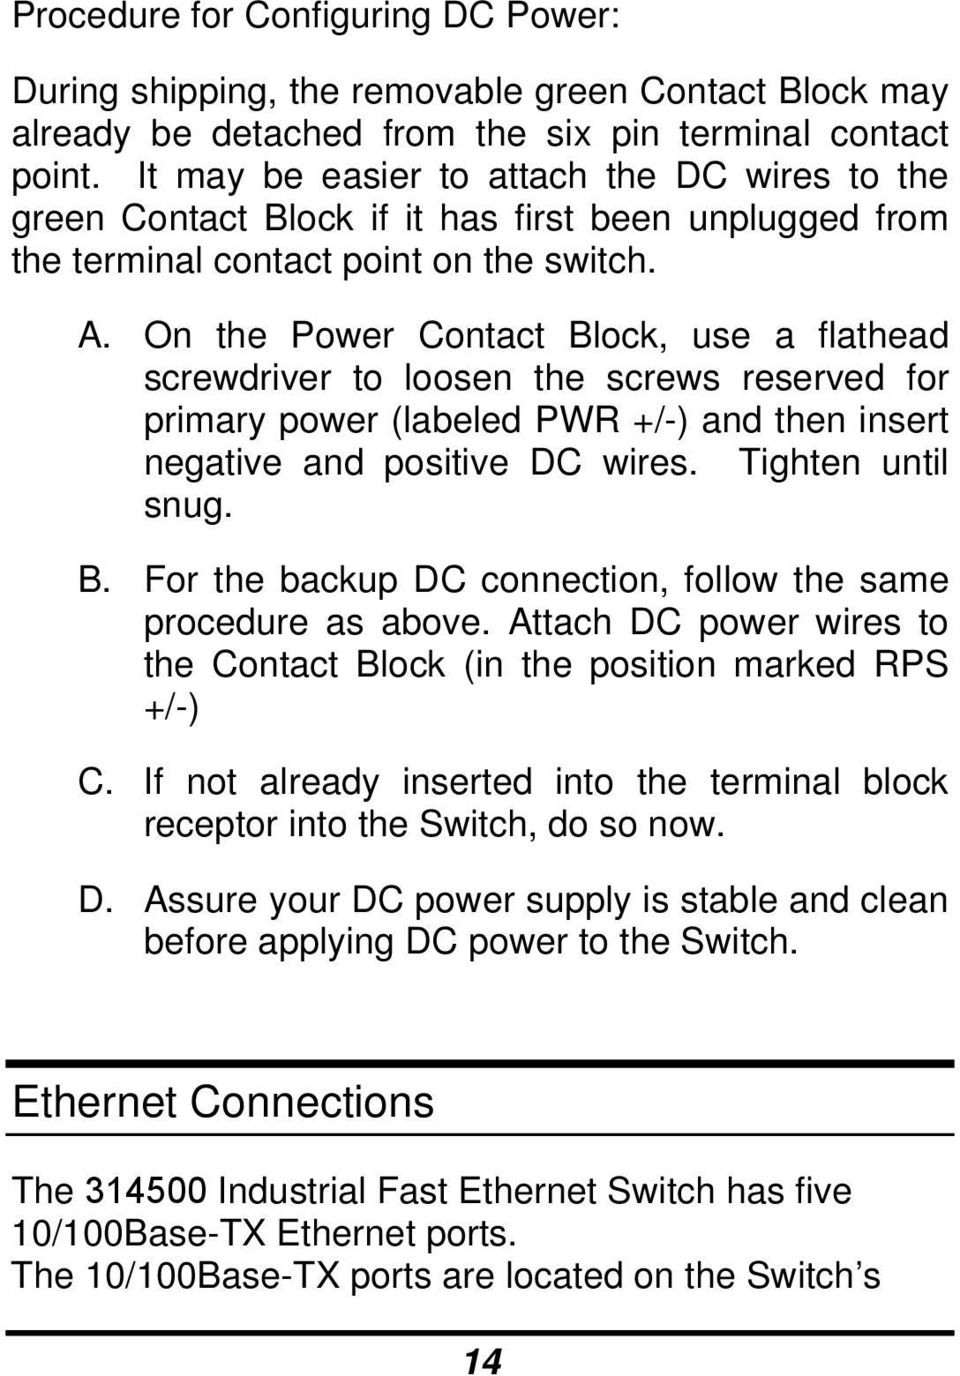 On the Power Contact Block, use a flathead screwdriver to loosen the screws reserved for primary power (labeled PWR +/-) and then insert negative and positive DC wires. Tighten until snug. B. For the backup DC connection, follow the same procedure as above.